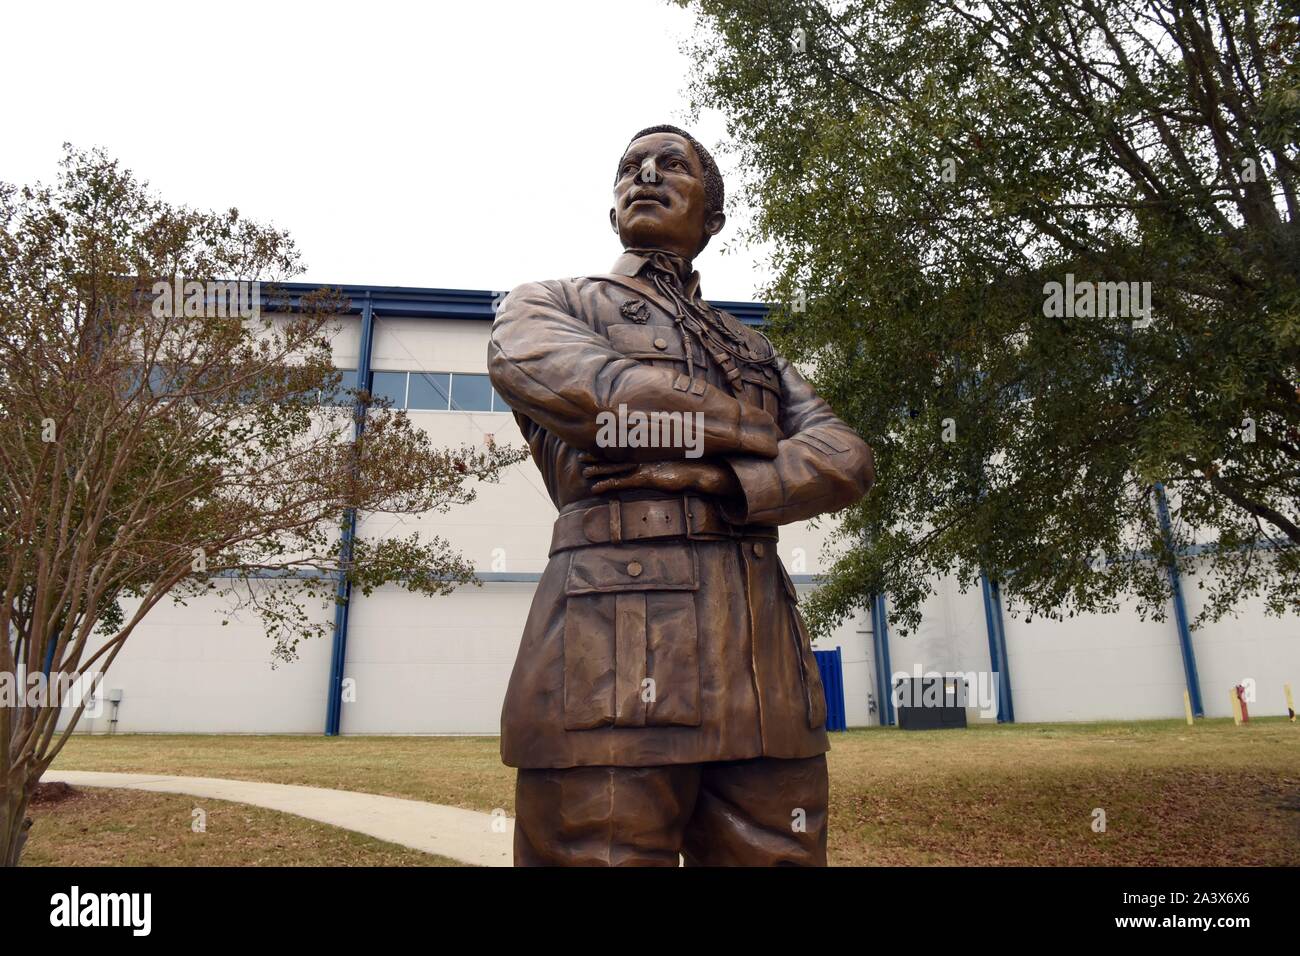 Warner Robins, United States. 09 October, 2019. Statue of 2nd Lt. Eugene Jacques Bullard, the first African American fighter pilot, is unveiled during a ceremony at the Museum of Aviation on Warner Robins Air Force Base October 9, 2019 in Warner Robins, Georgia. The statue was donated to the United States Air Force by the Georgia World War I Centennial Commission.  Credit: Tommie Horton/Planetpix/Alamy Live News Stock Photo